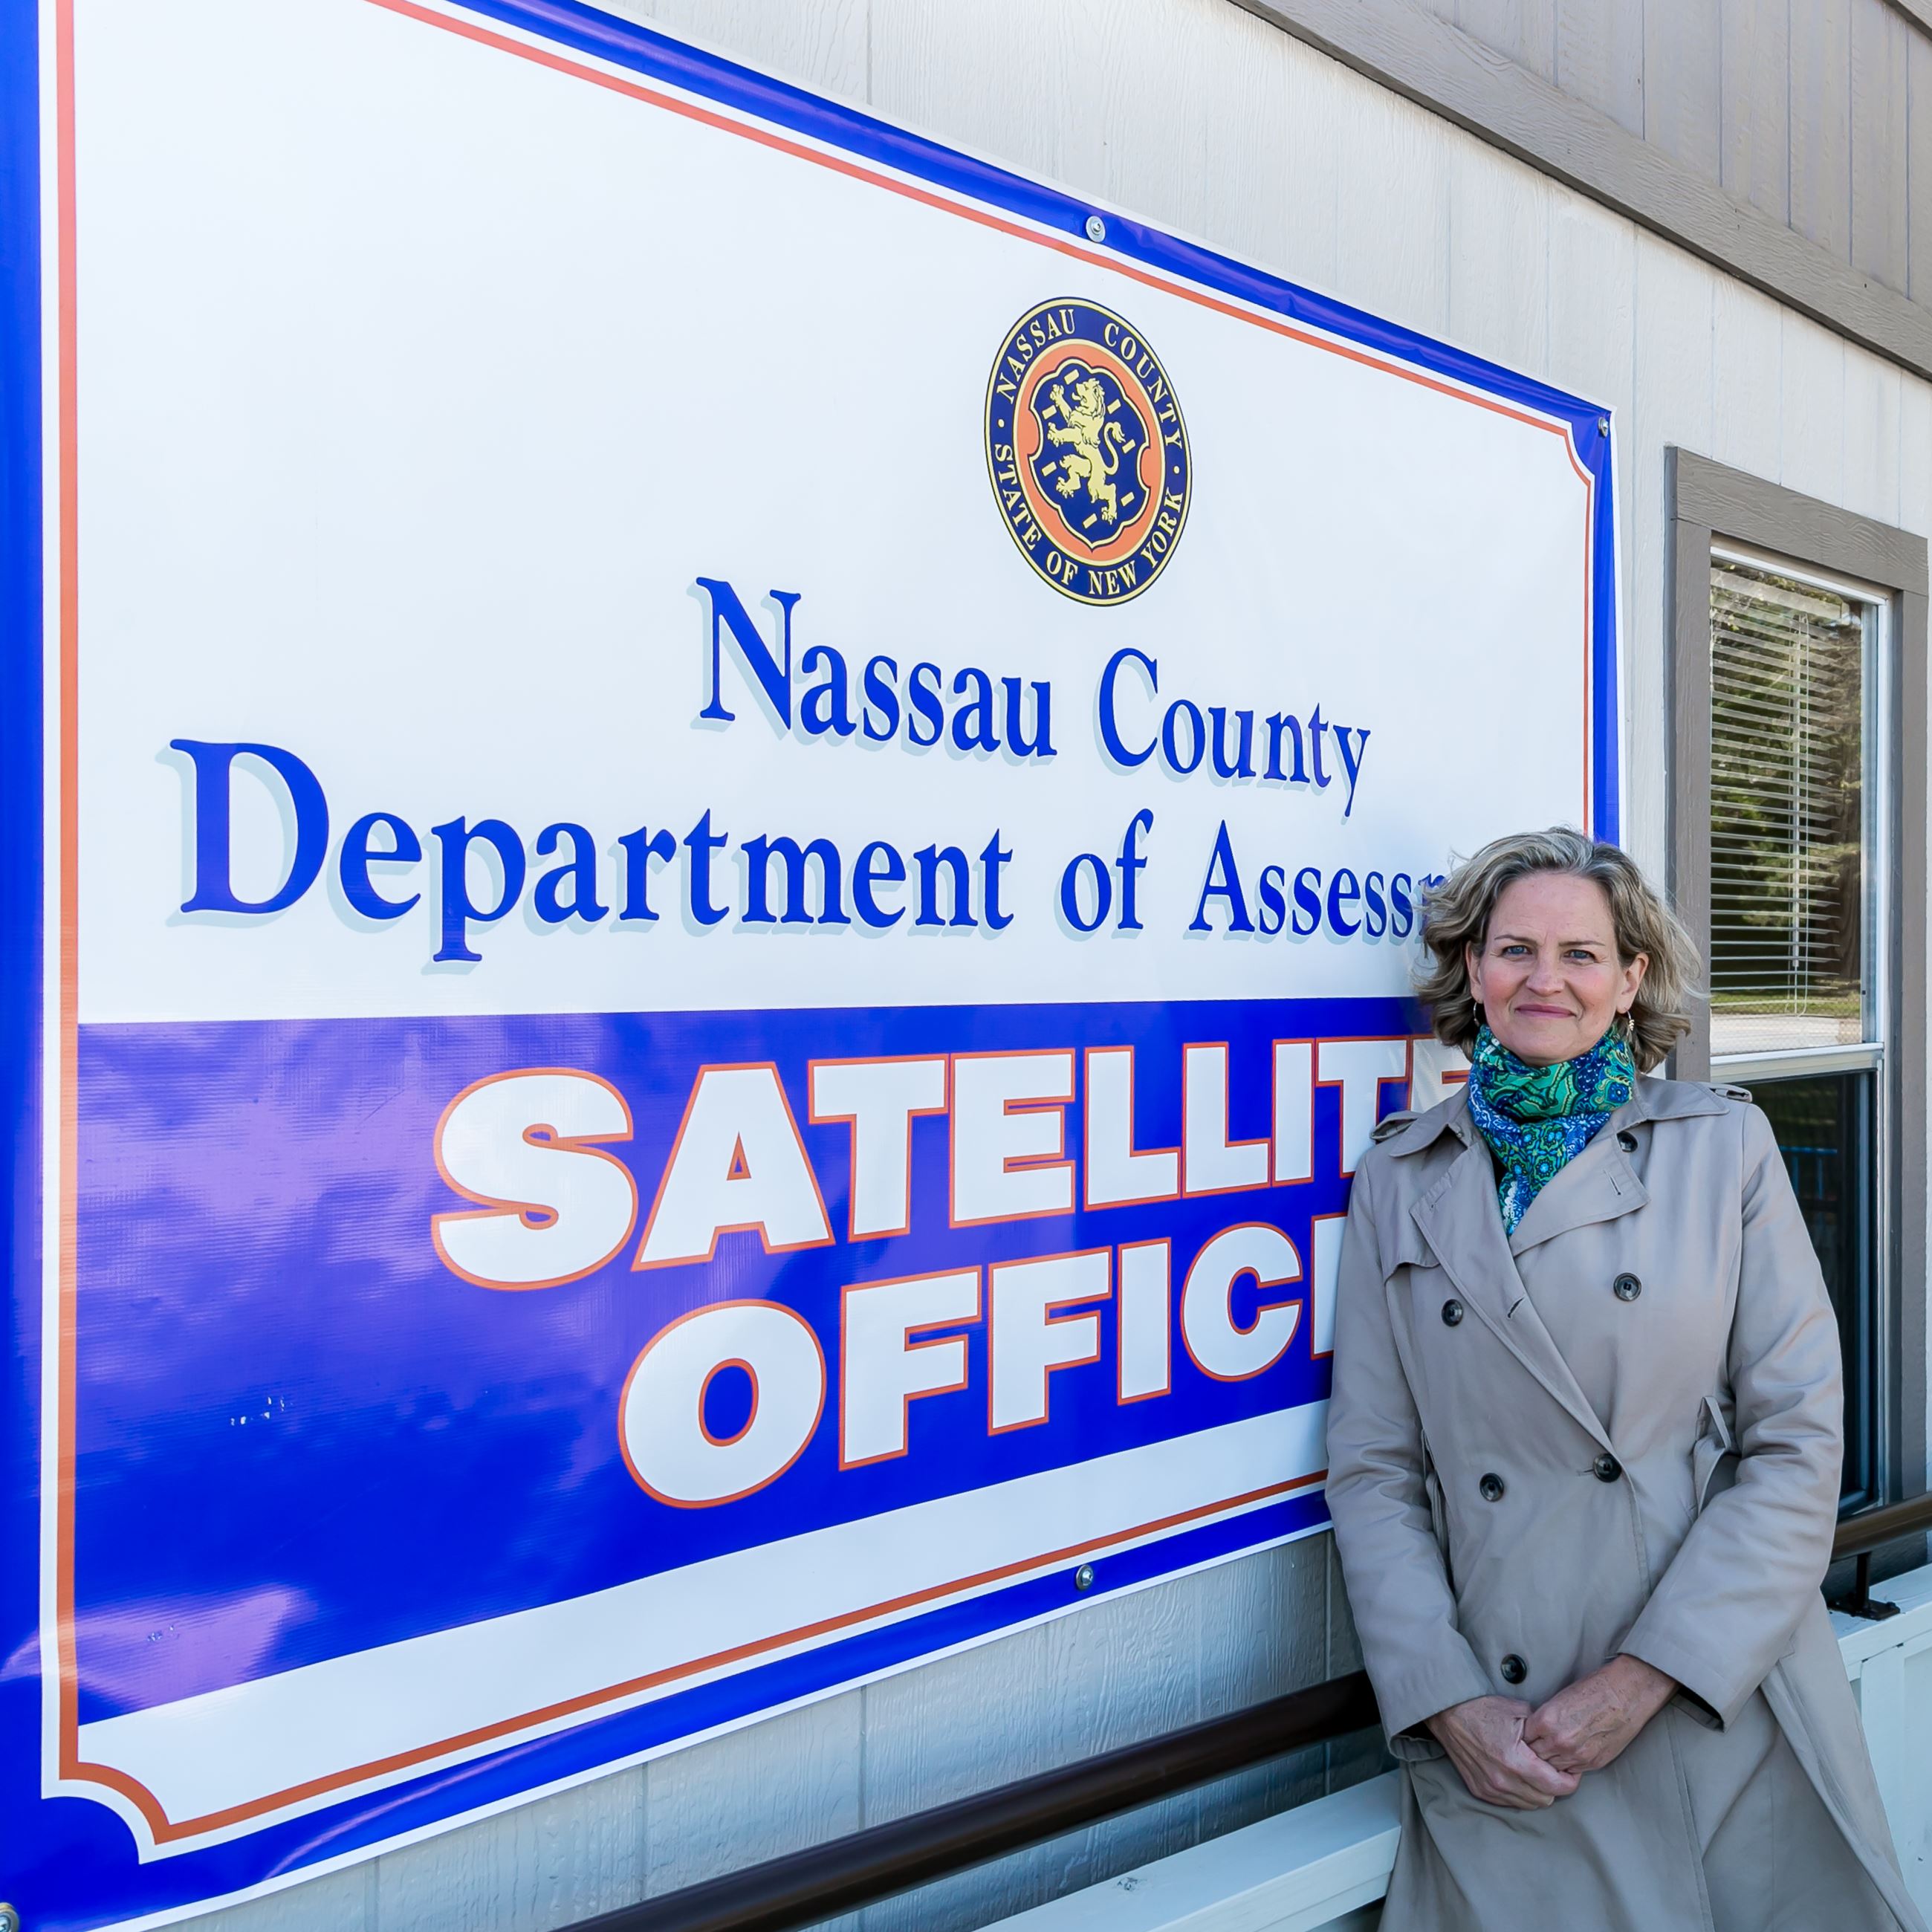 County Executive Laura Curran beside a Department of Assessment satellite office